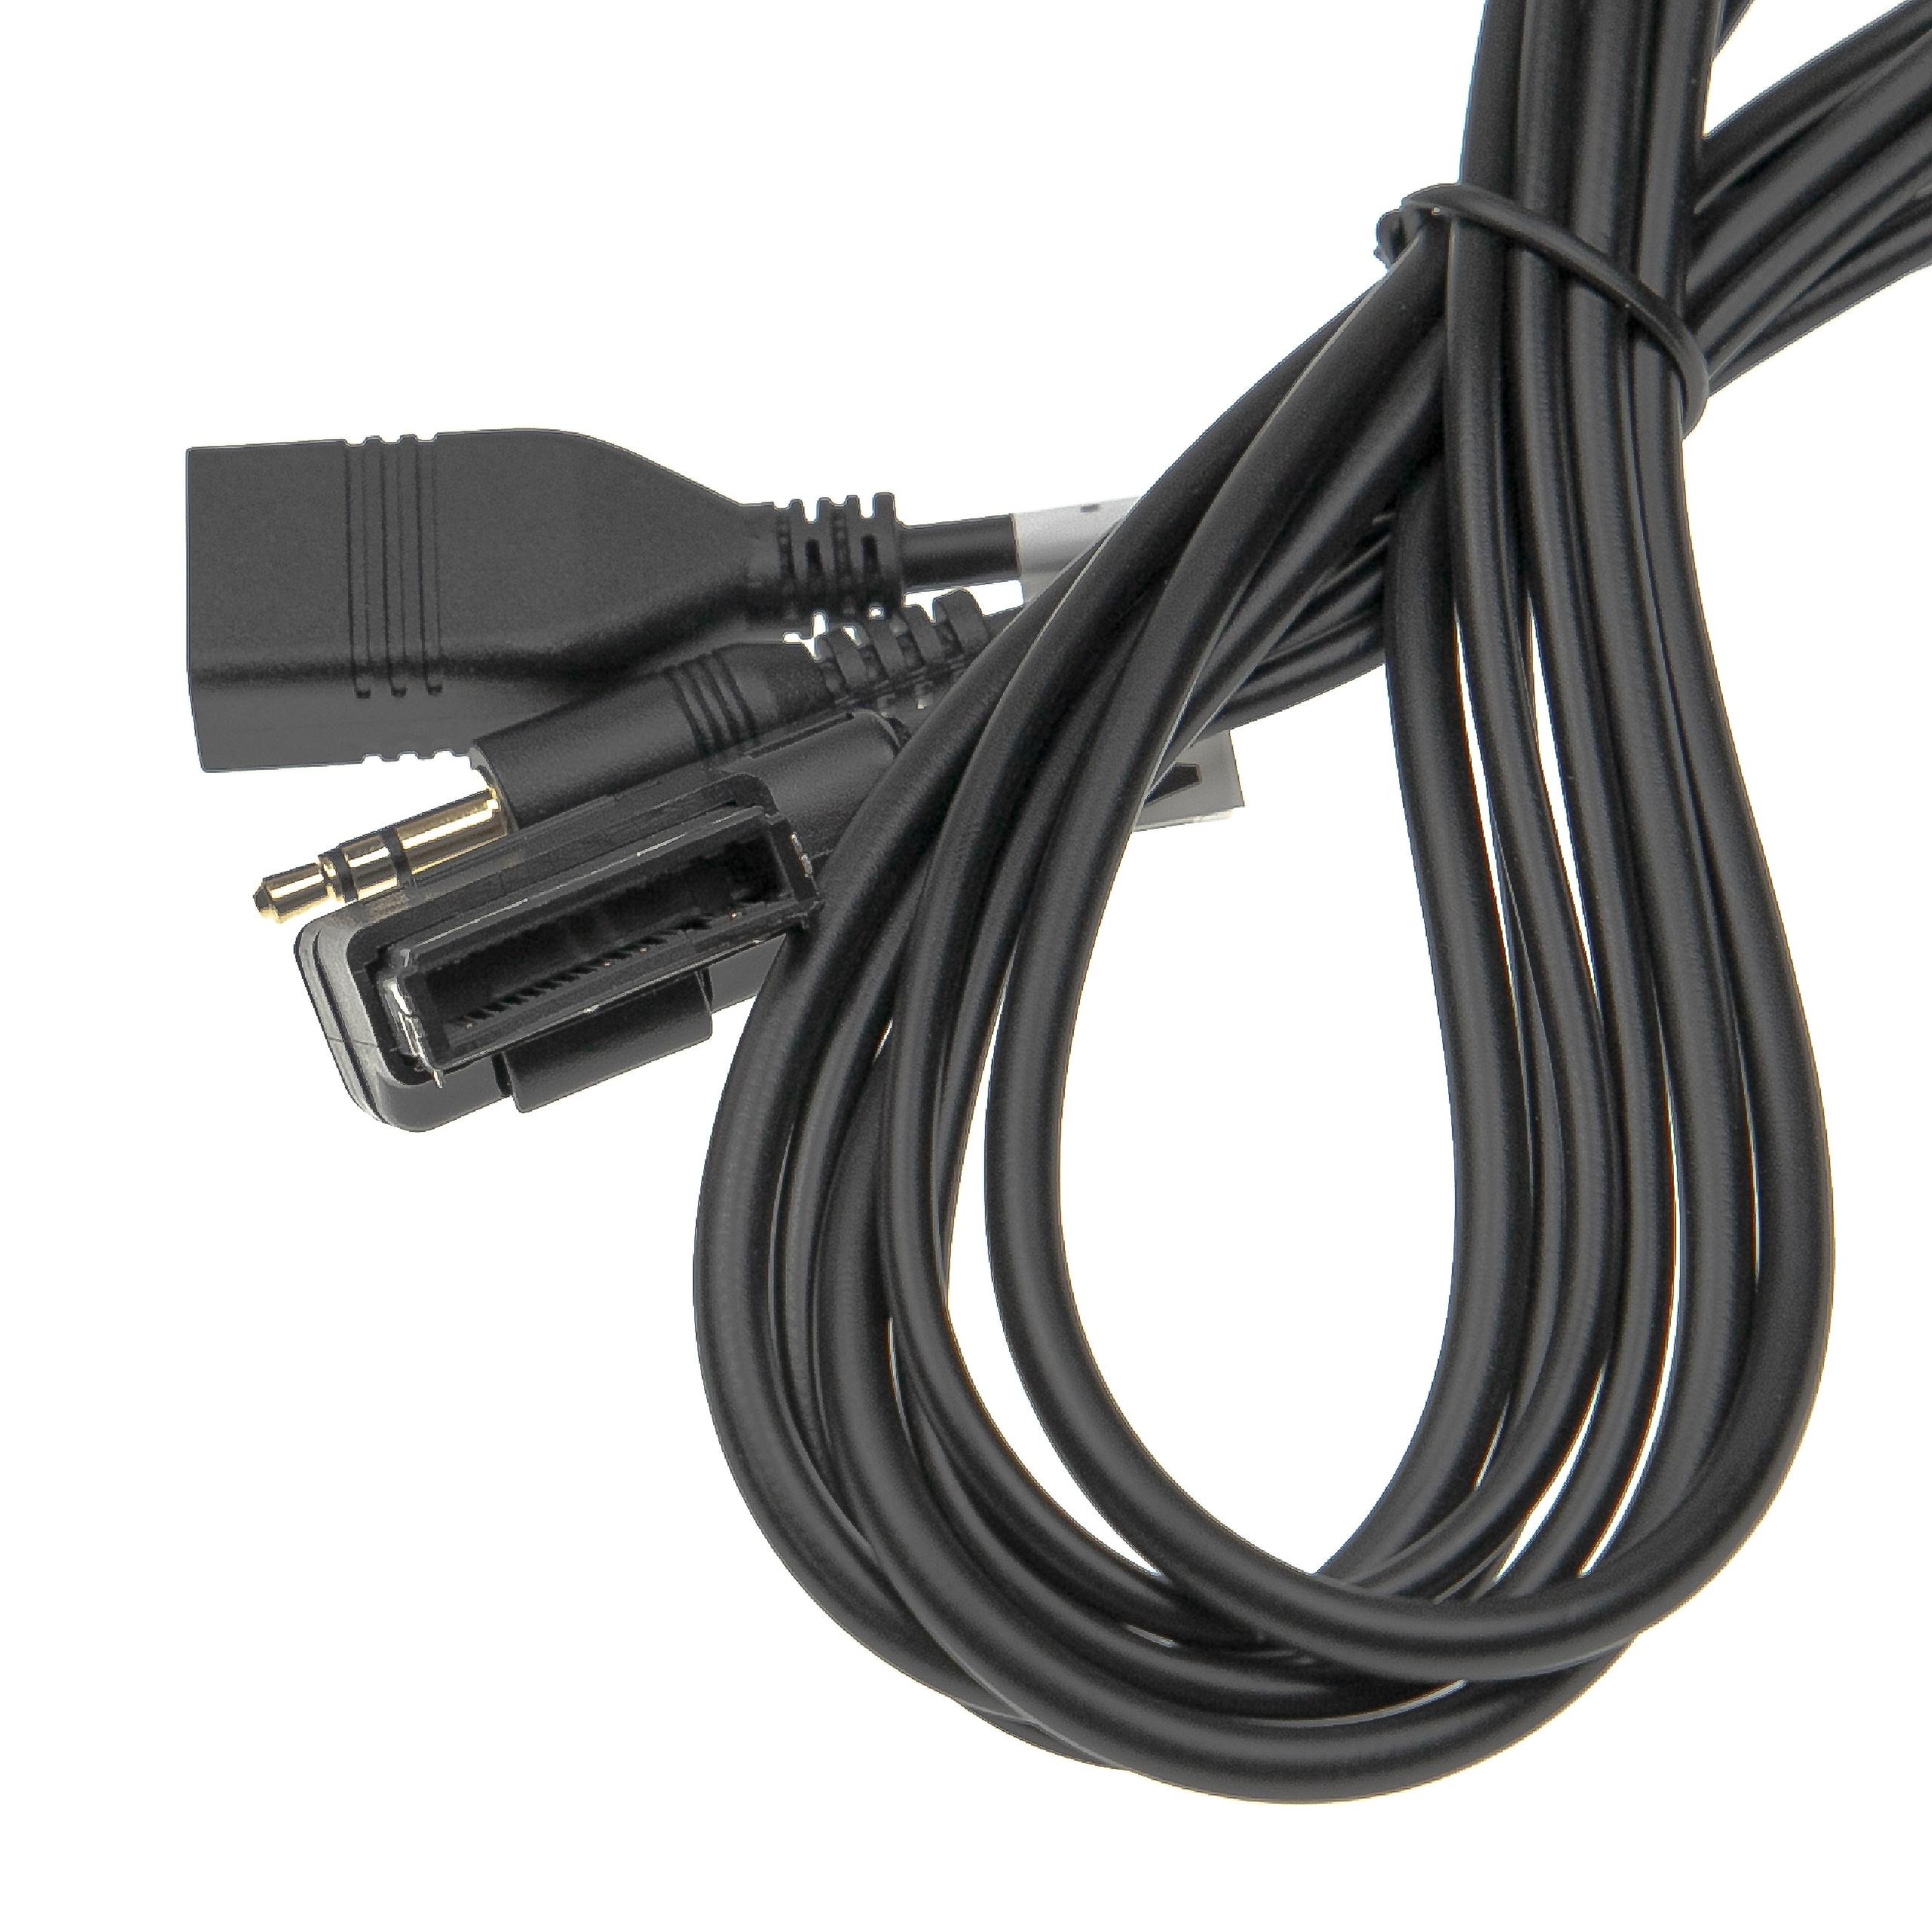 AUX Audio Adapter Cable for A1 Audi Car Radio etc.